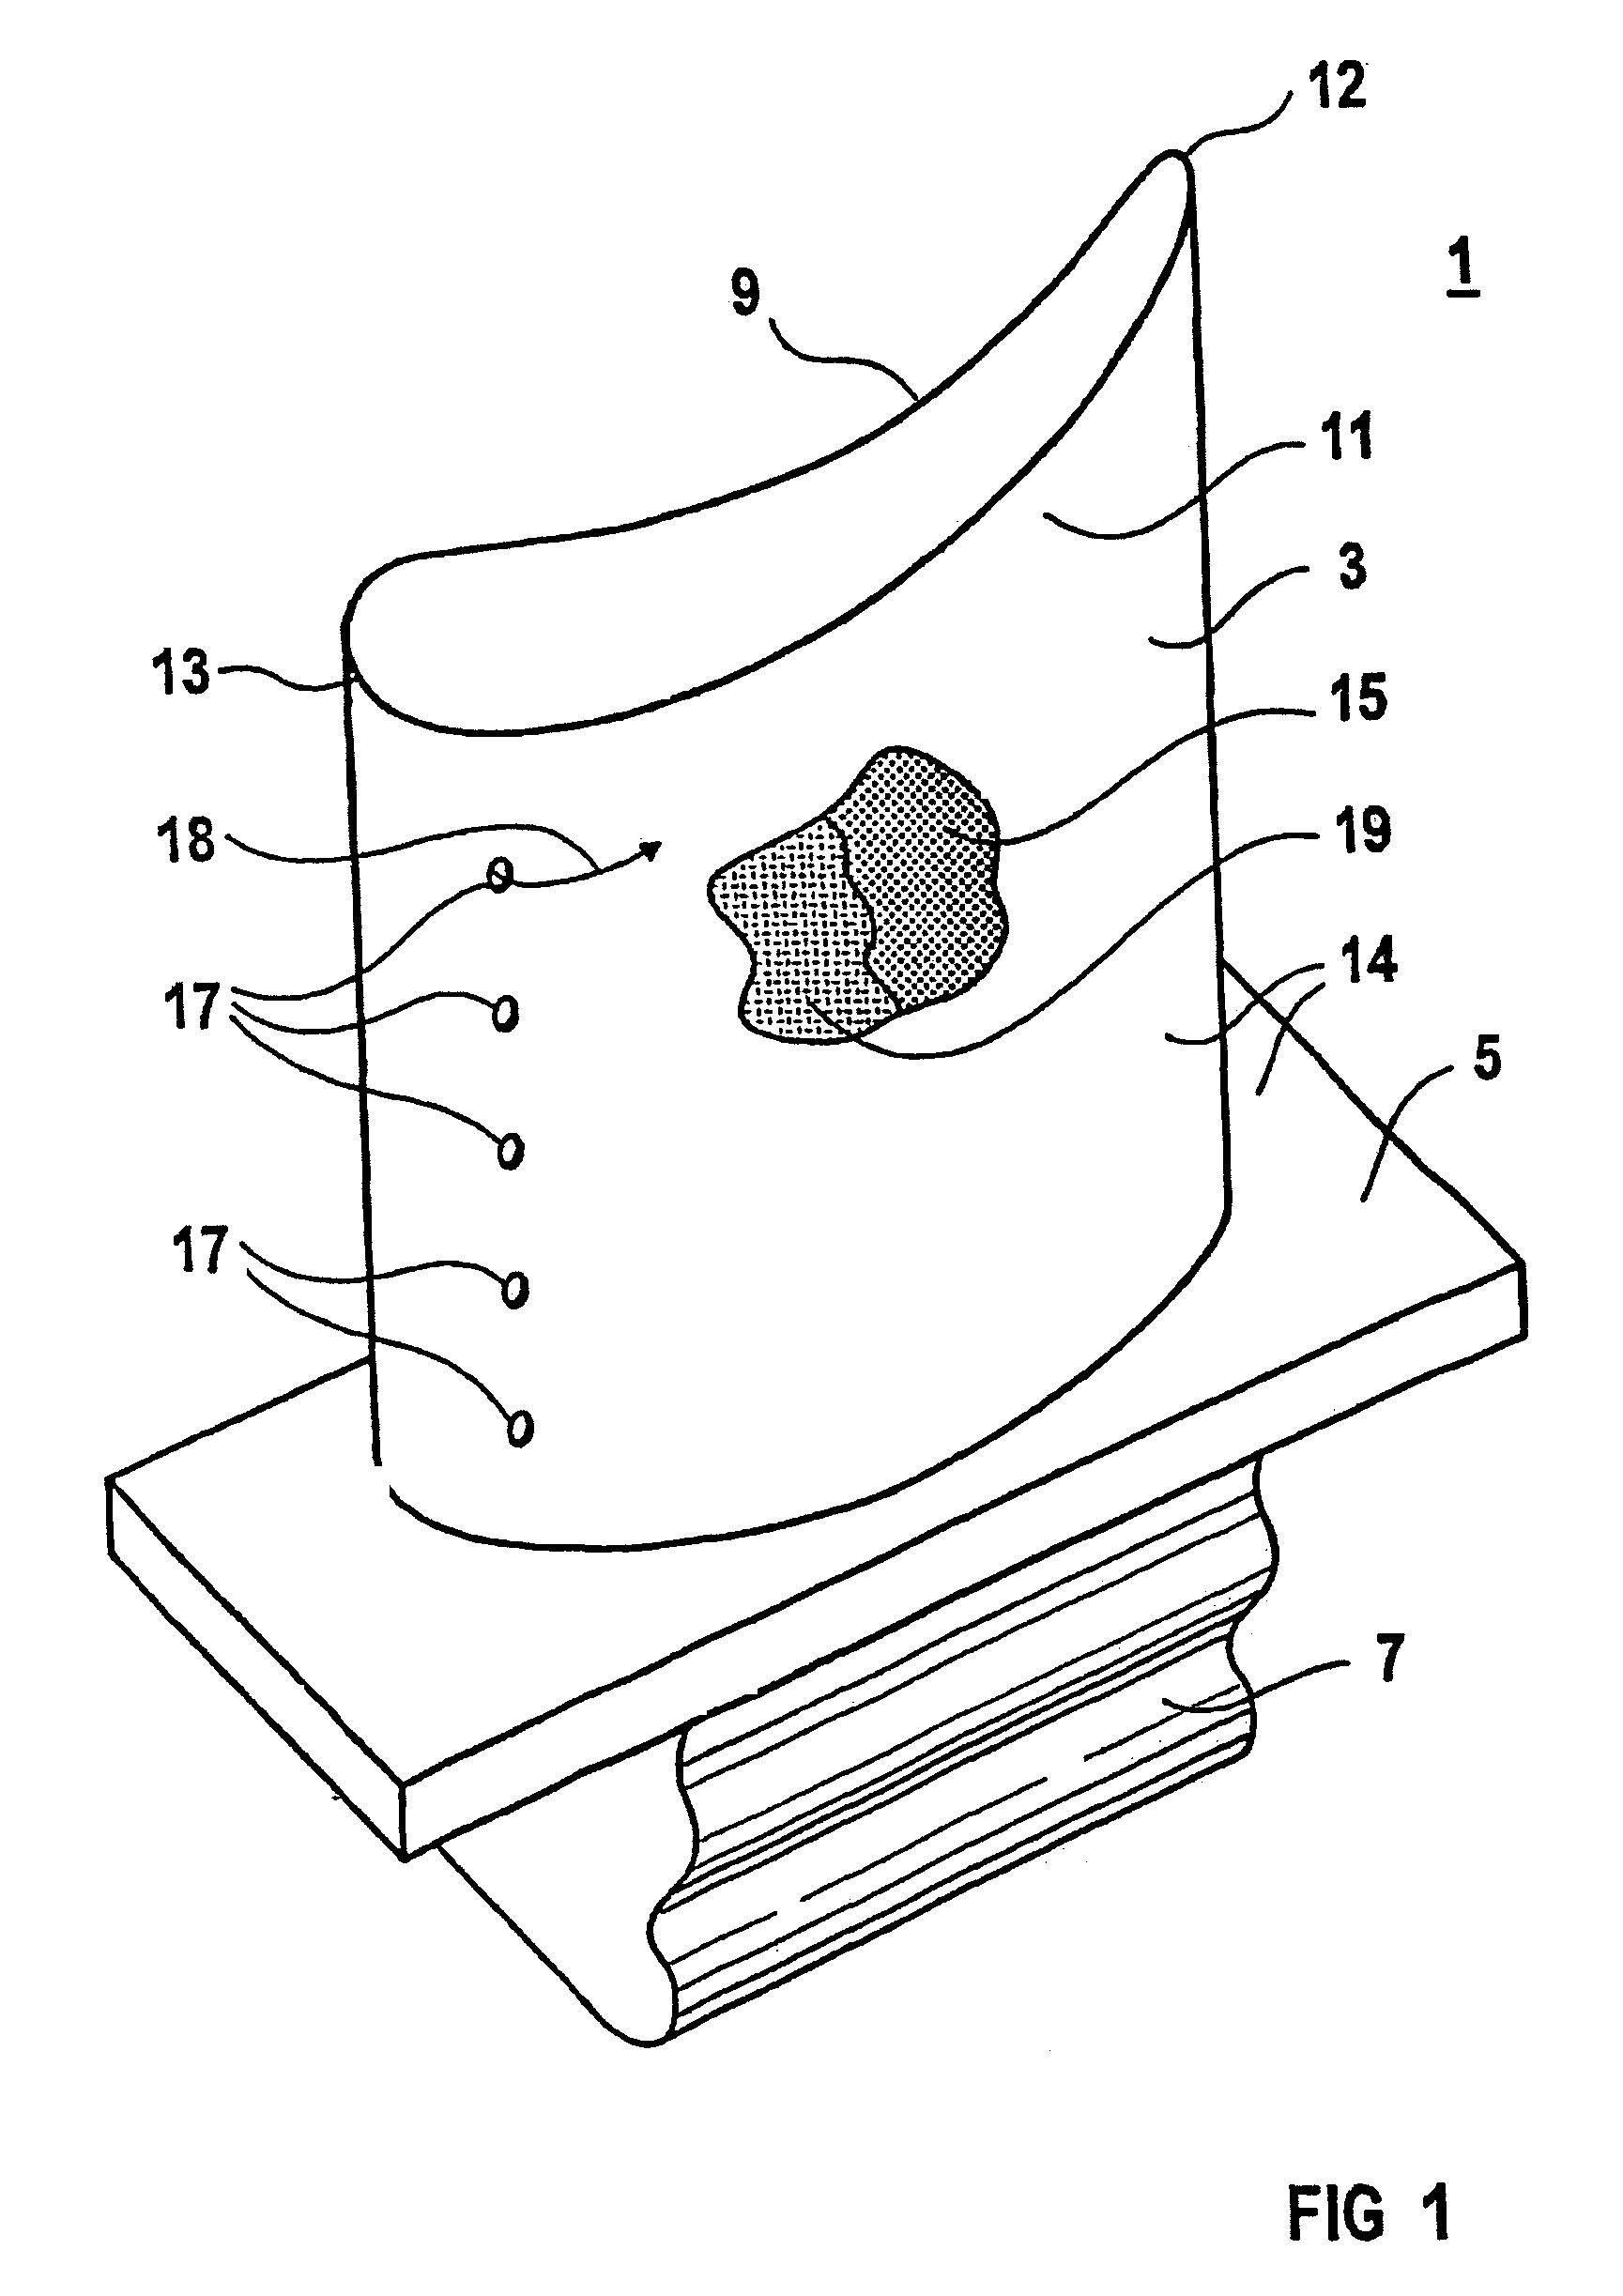 Method for smoothing the surface of a gas turbine blade